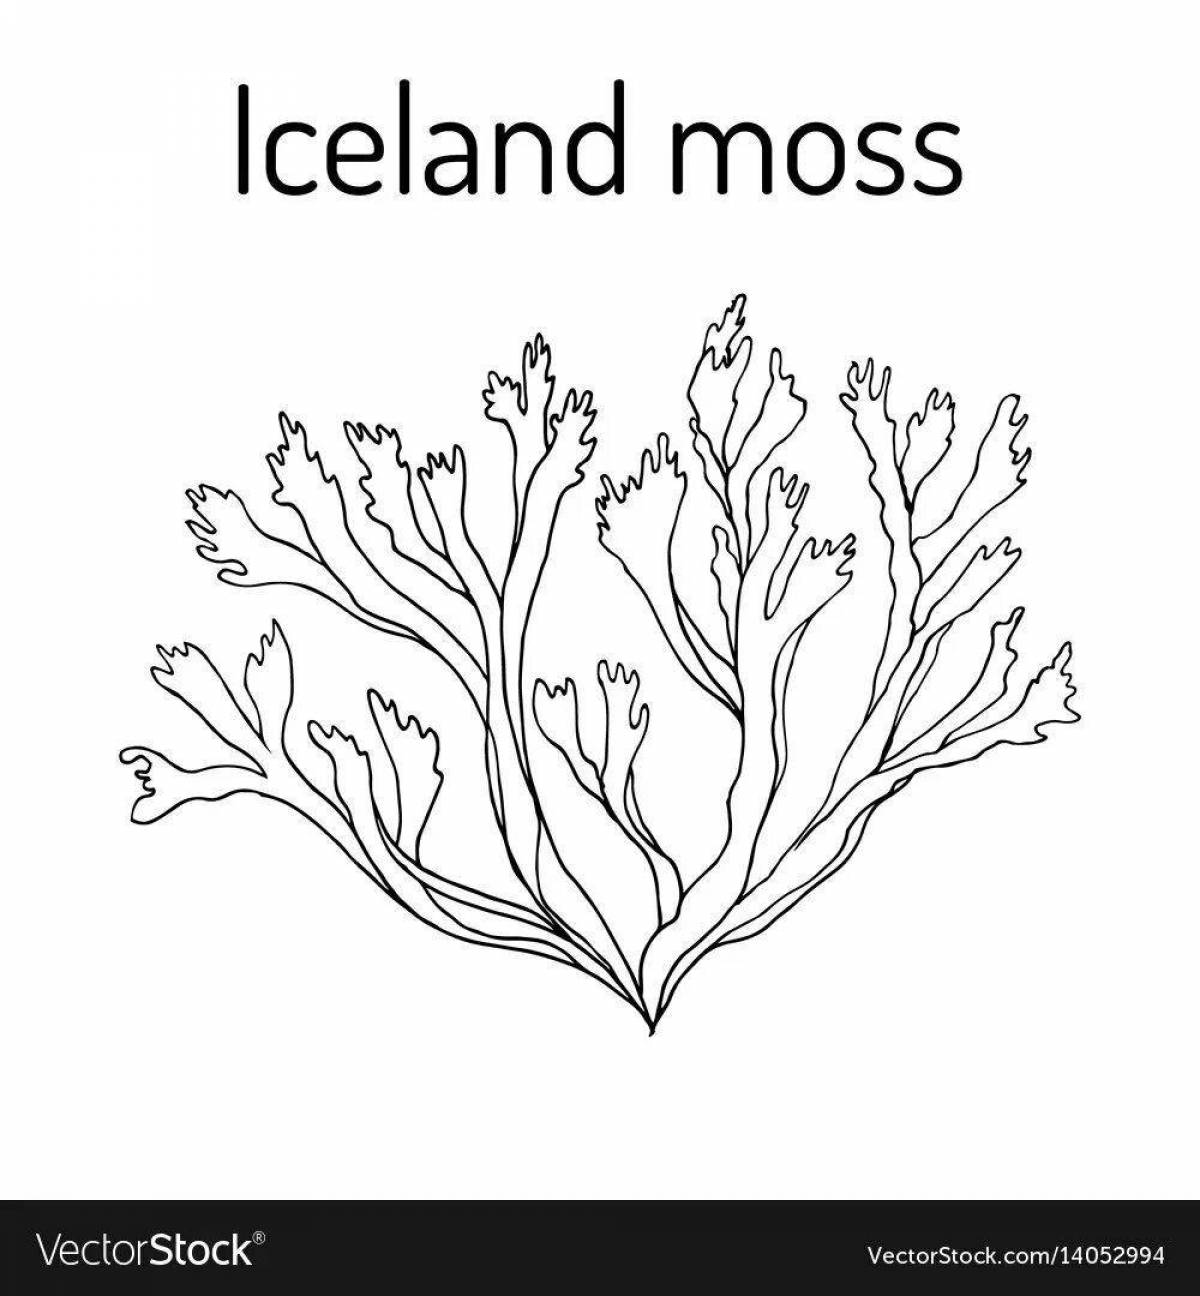 Gorgeous moss coloring book for kids